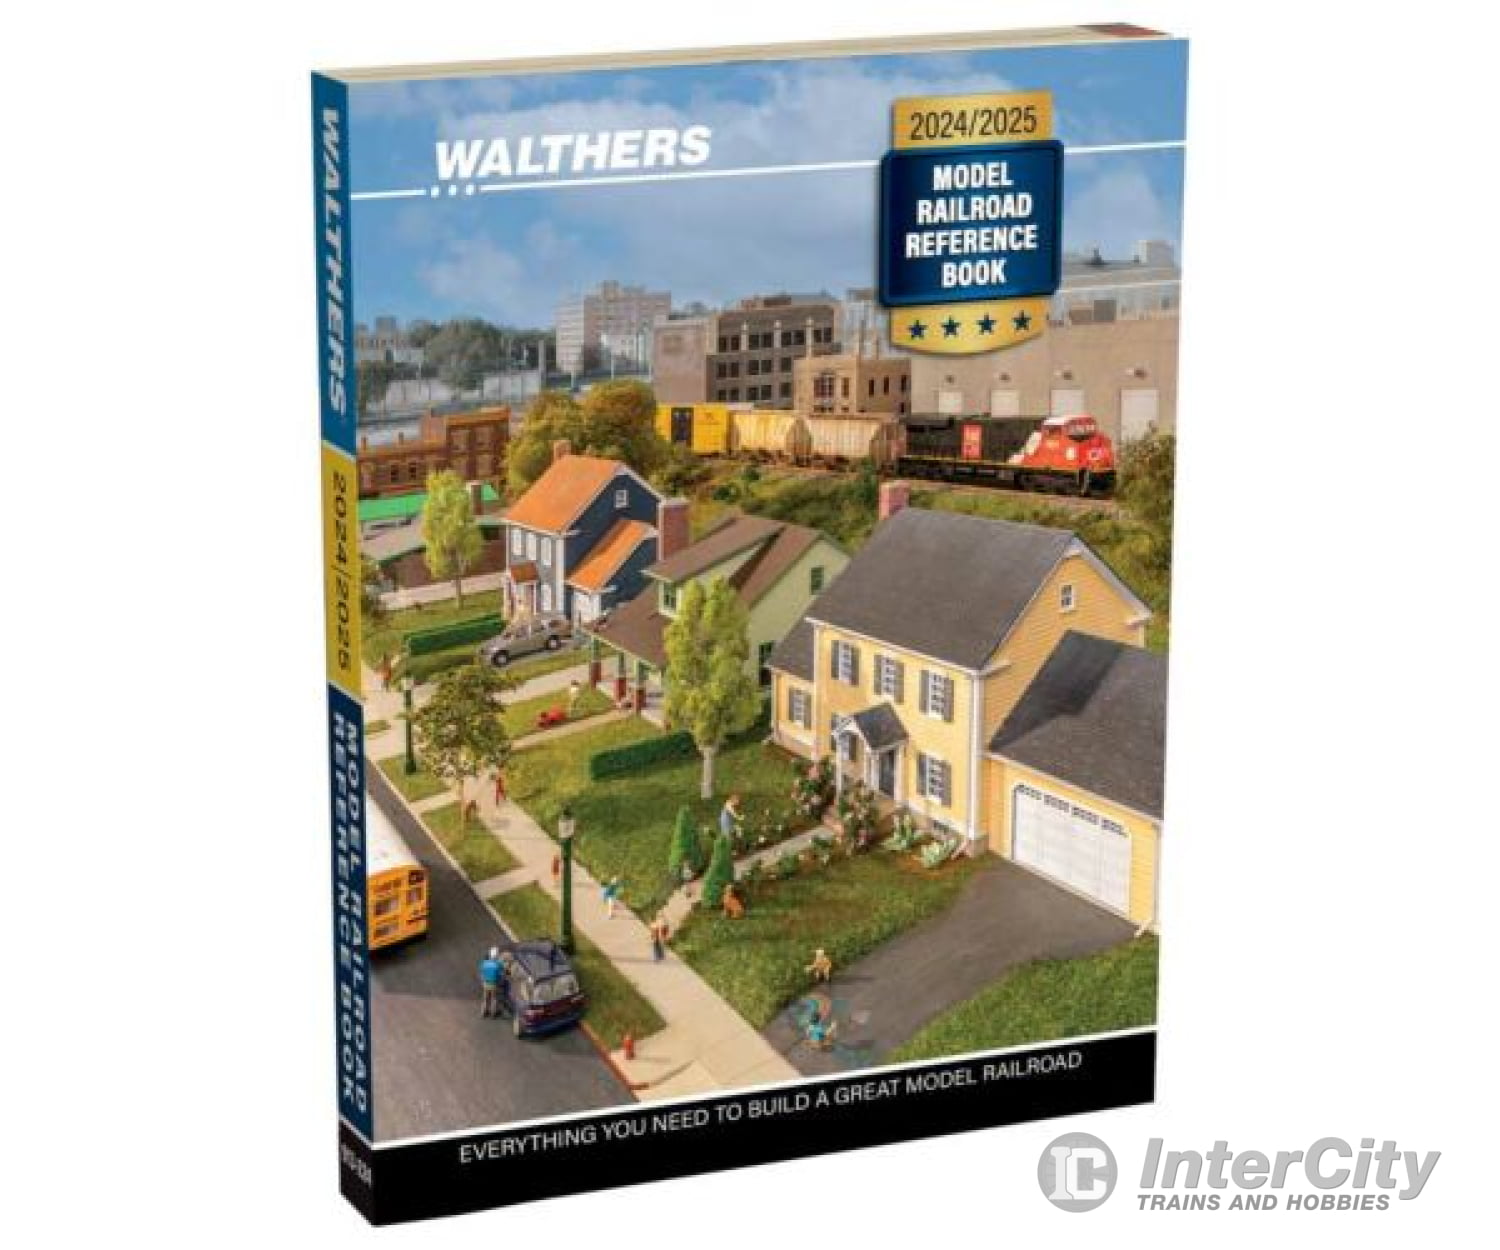 Walthers 2024/2025 Model Railroad Reference Book Catalogs